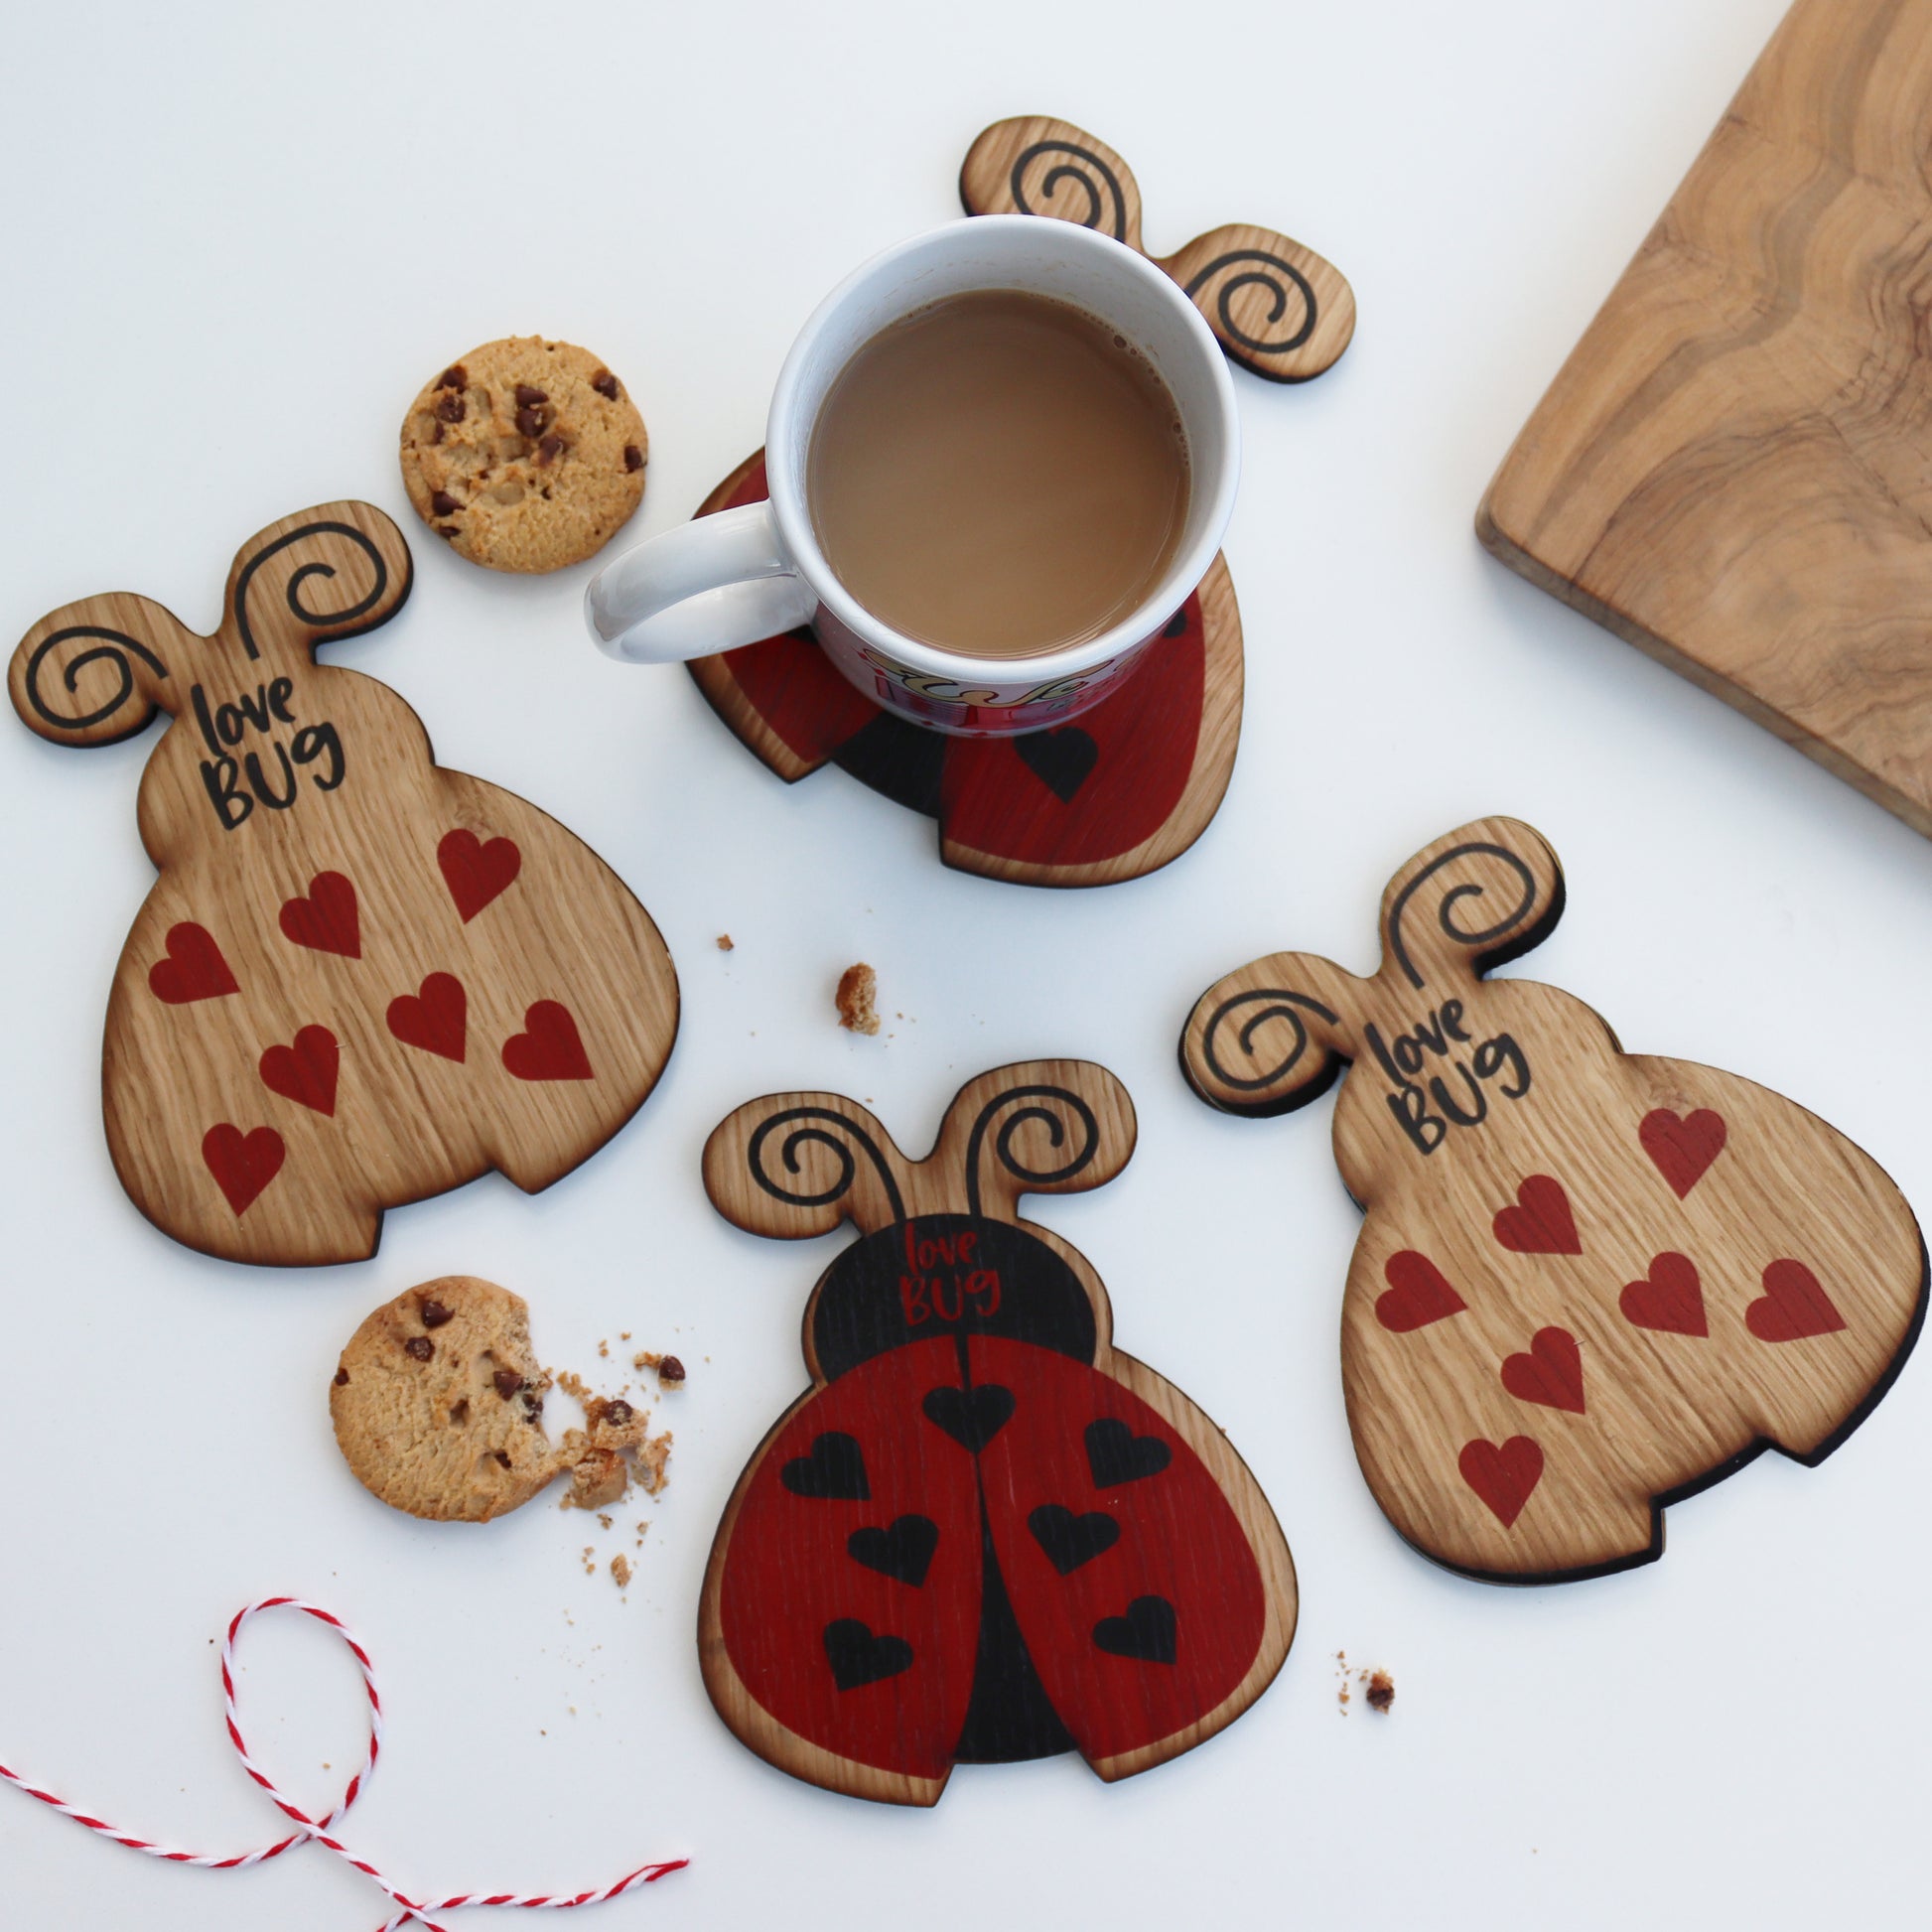 set of 4 wooden ladybird coasters 2 with a printed love bug and 2 with hearts